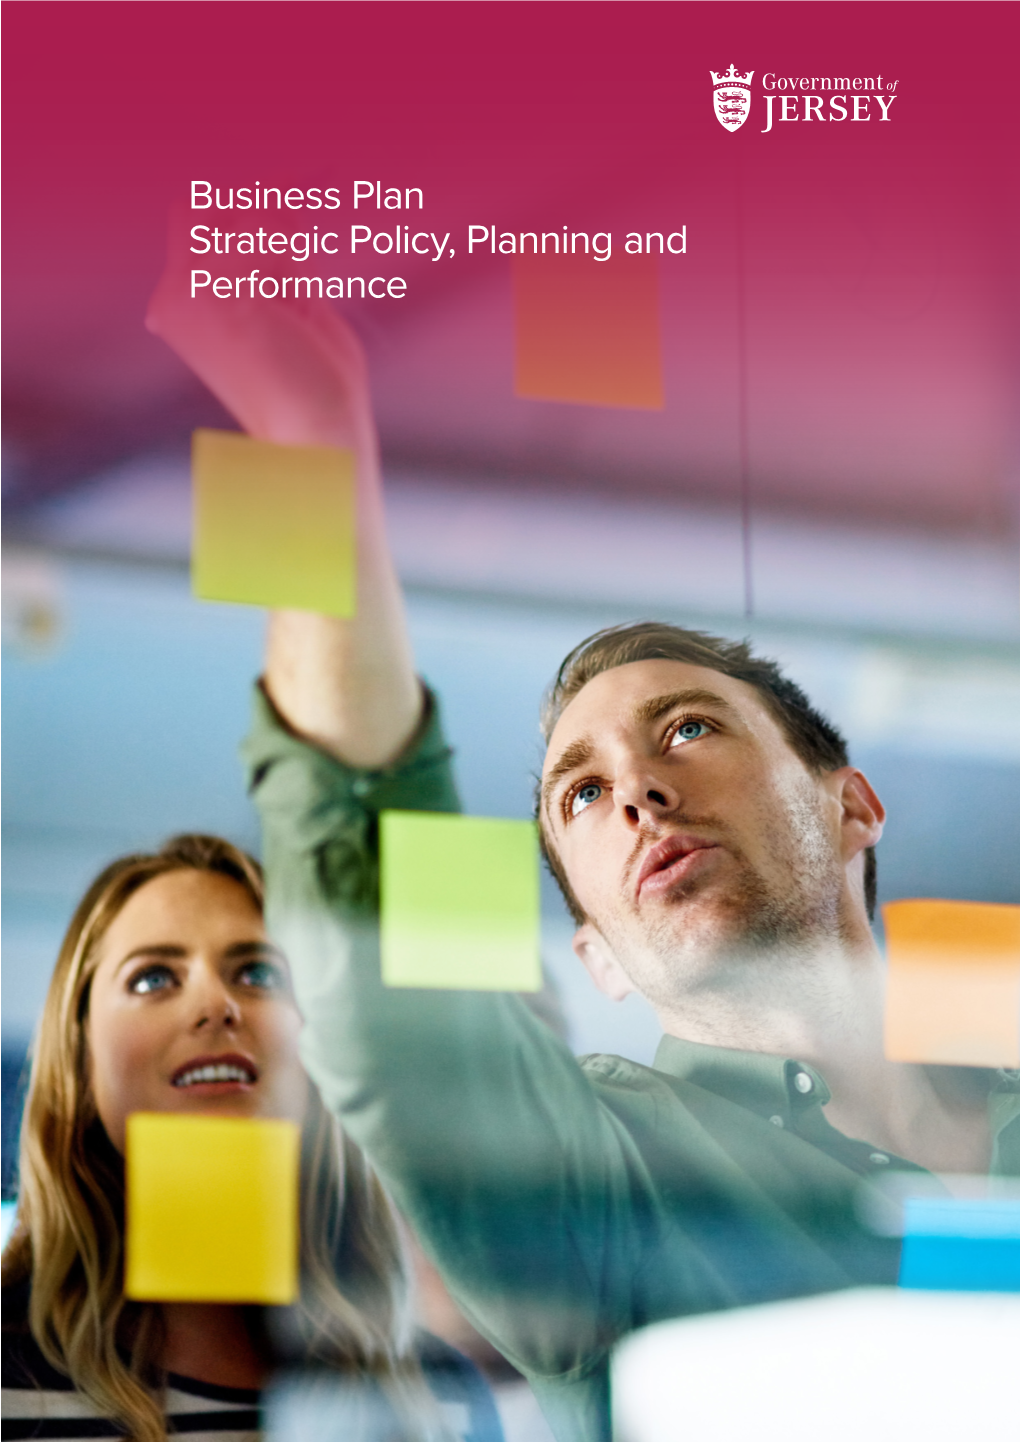 Business Plan Strategic Policy, Planning and Performance